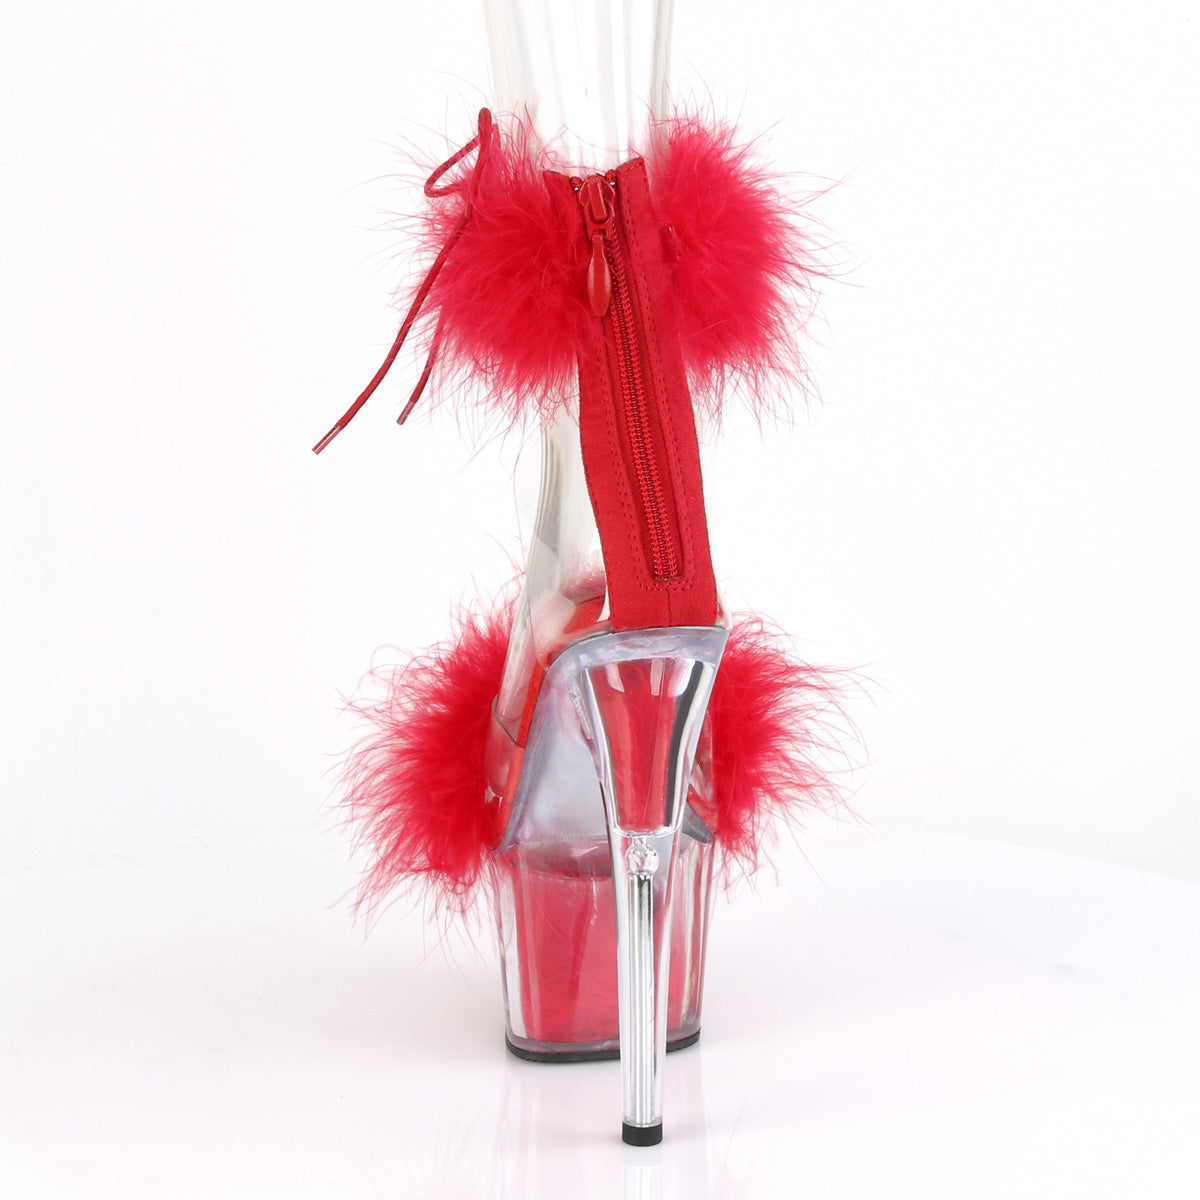 ADORE-724F Pleaser 7" Heel Clear Red Fur Pole Dancing Shoes-Pleaser- Sexy Shoes Fetish Footwear